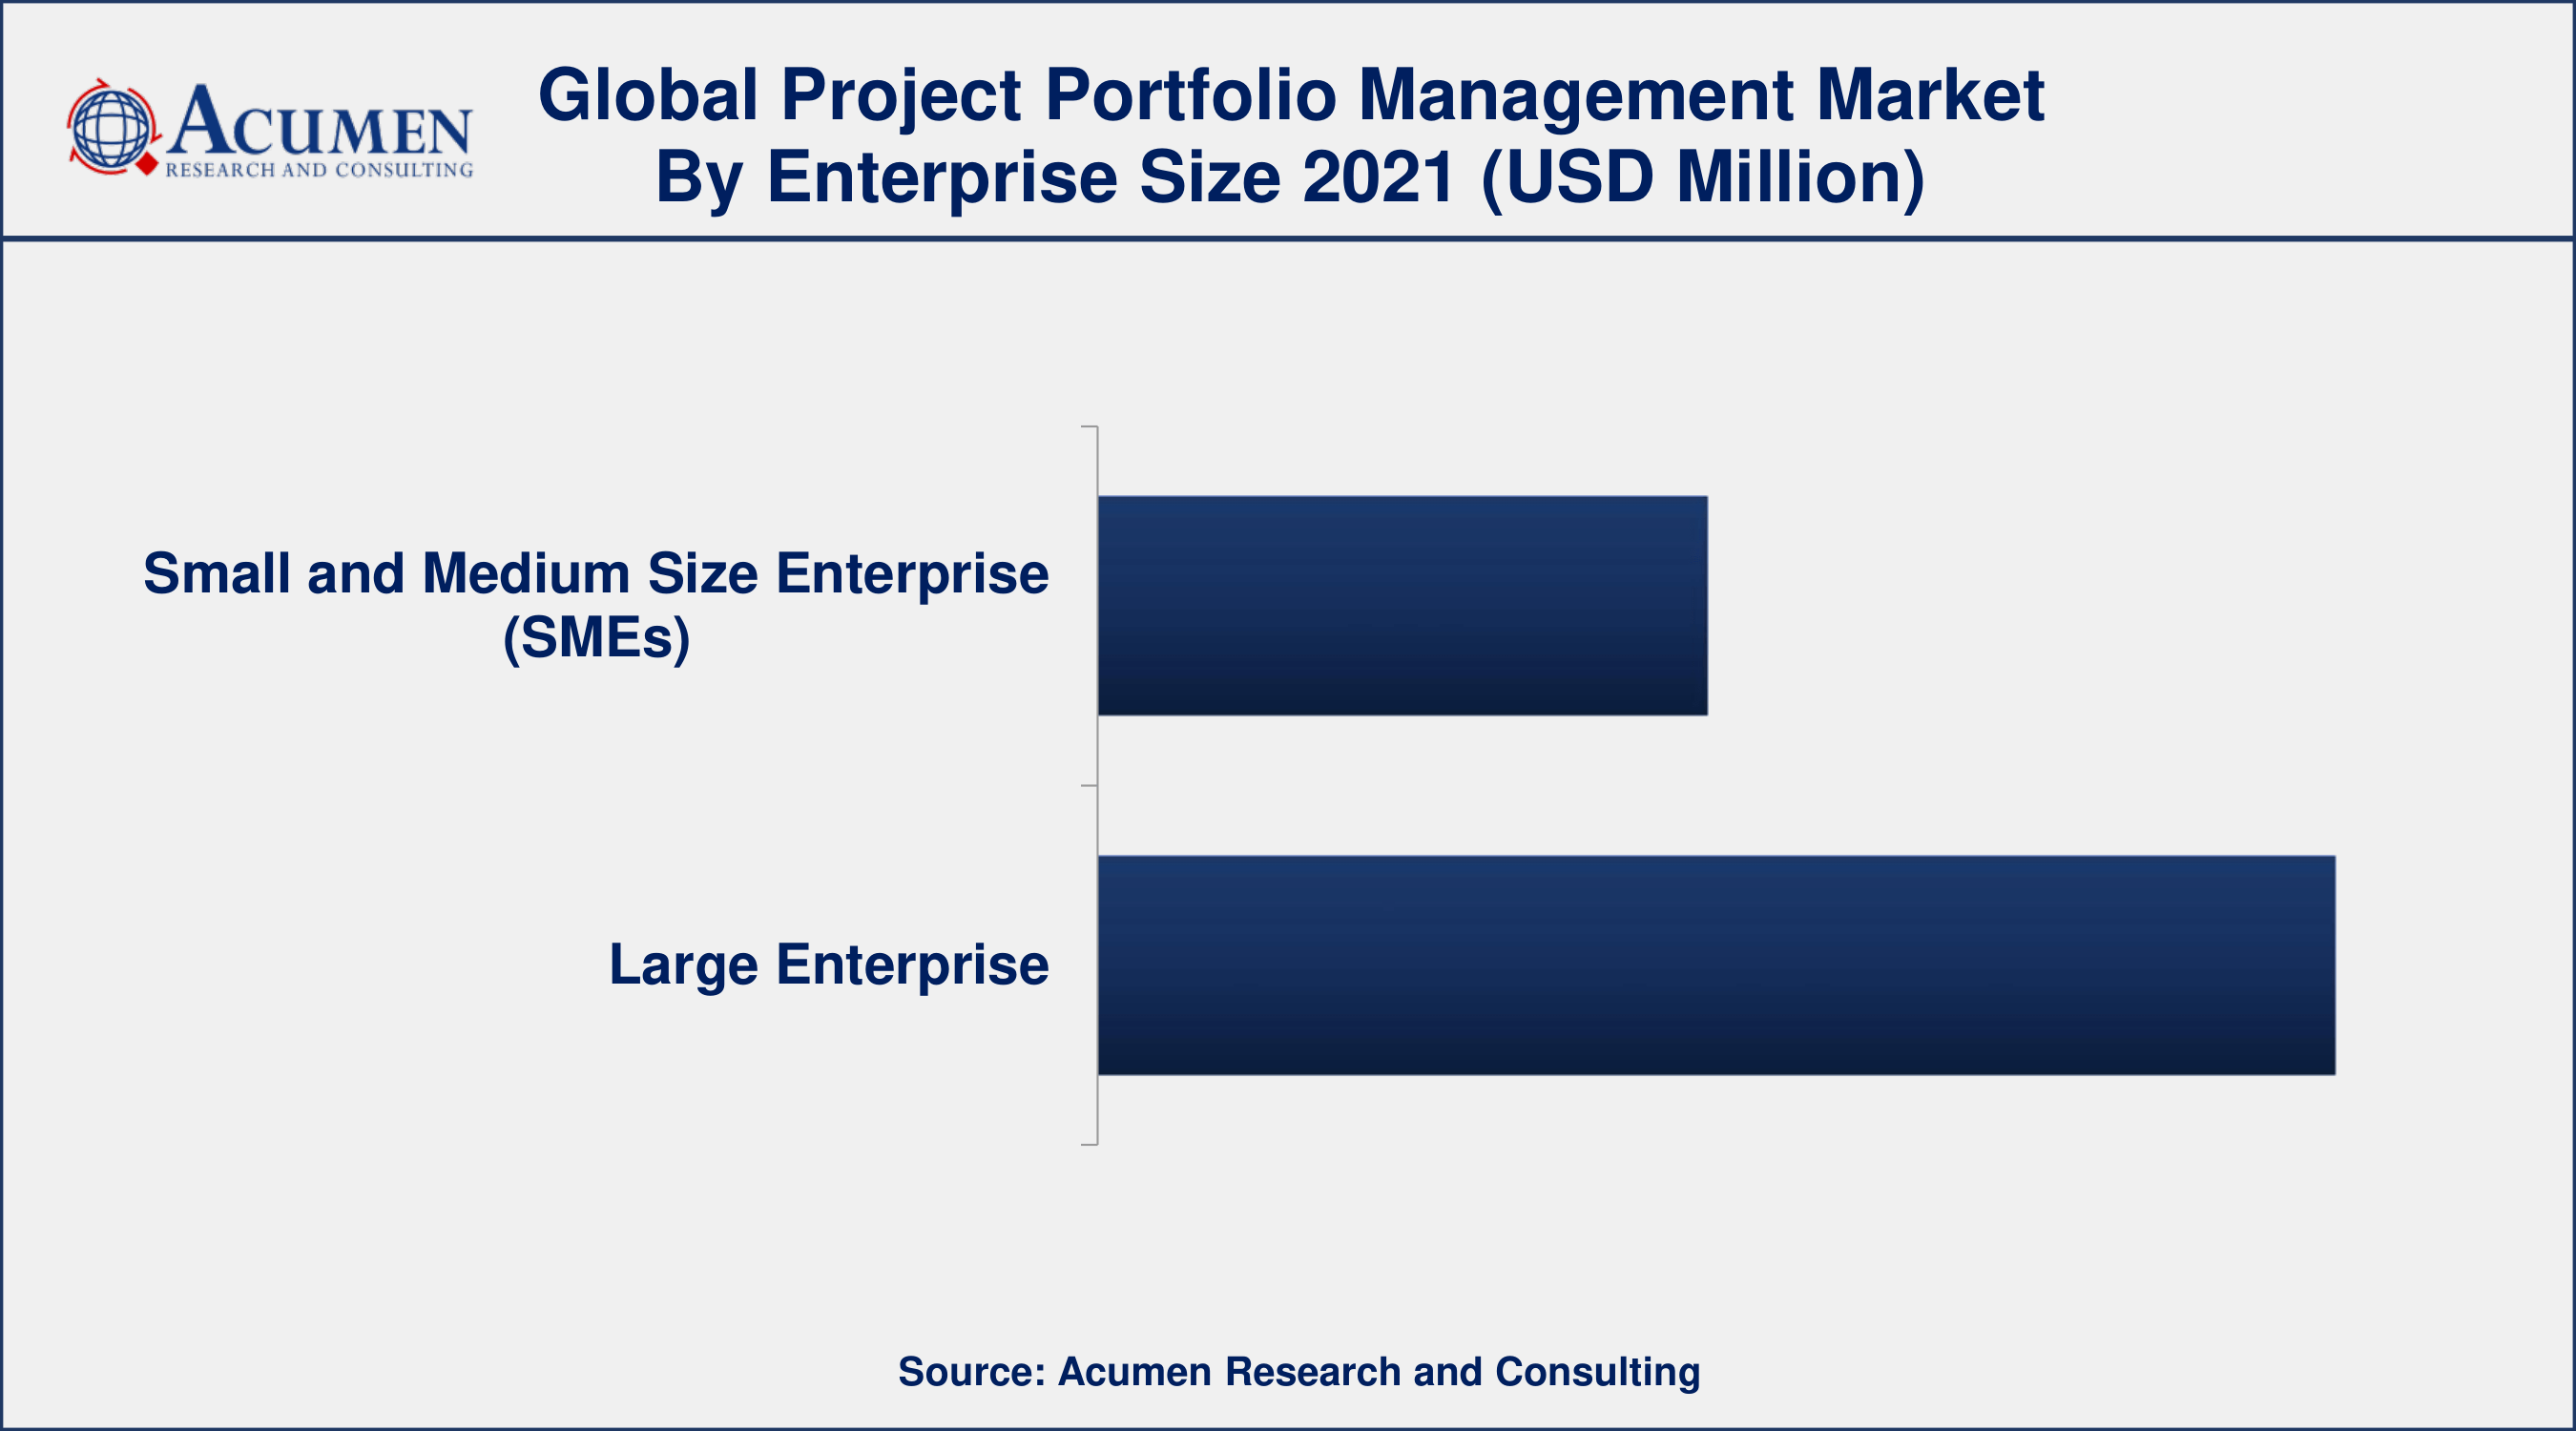 Rising demand for cloud-based PPM solutions, drives the project portfolio management market size